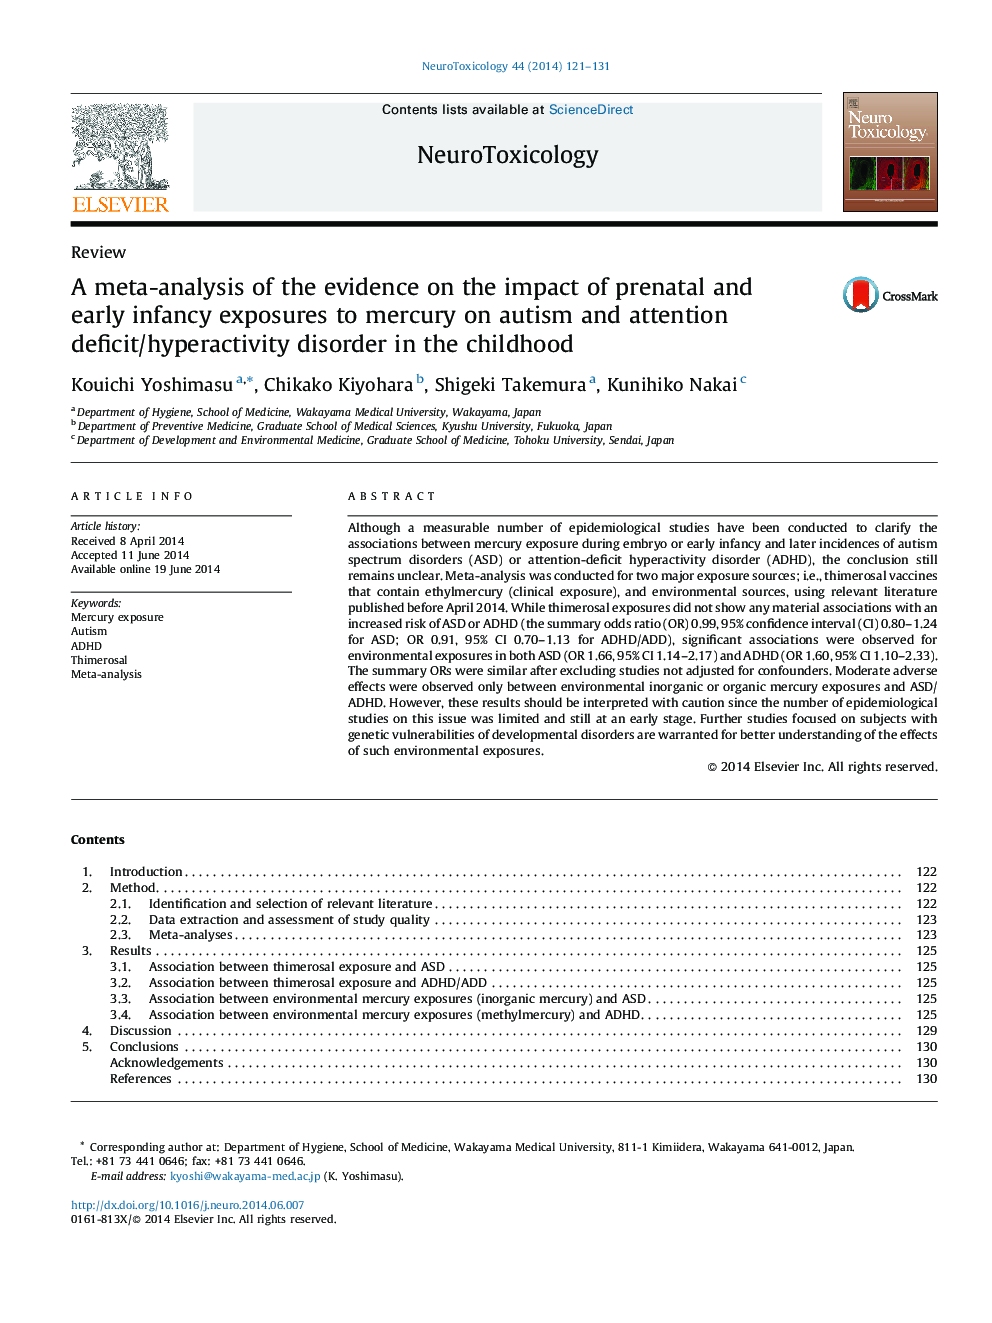 A meta-analysis of the evidence on the impact of prenatal and early infancy exposures to mercury on autism and attention deficit/hyperactivity disorder in the childhood